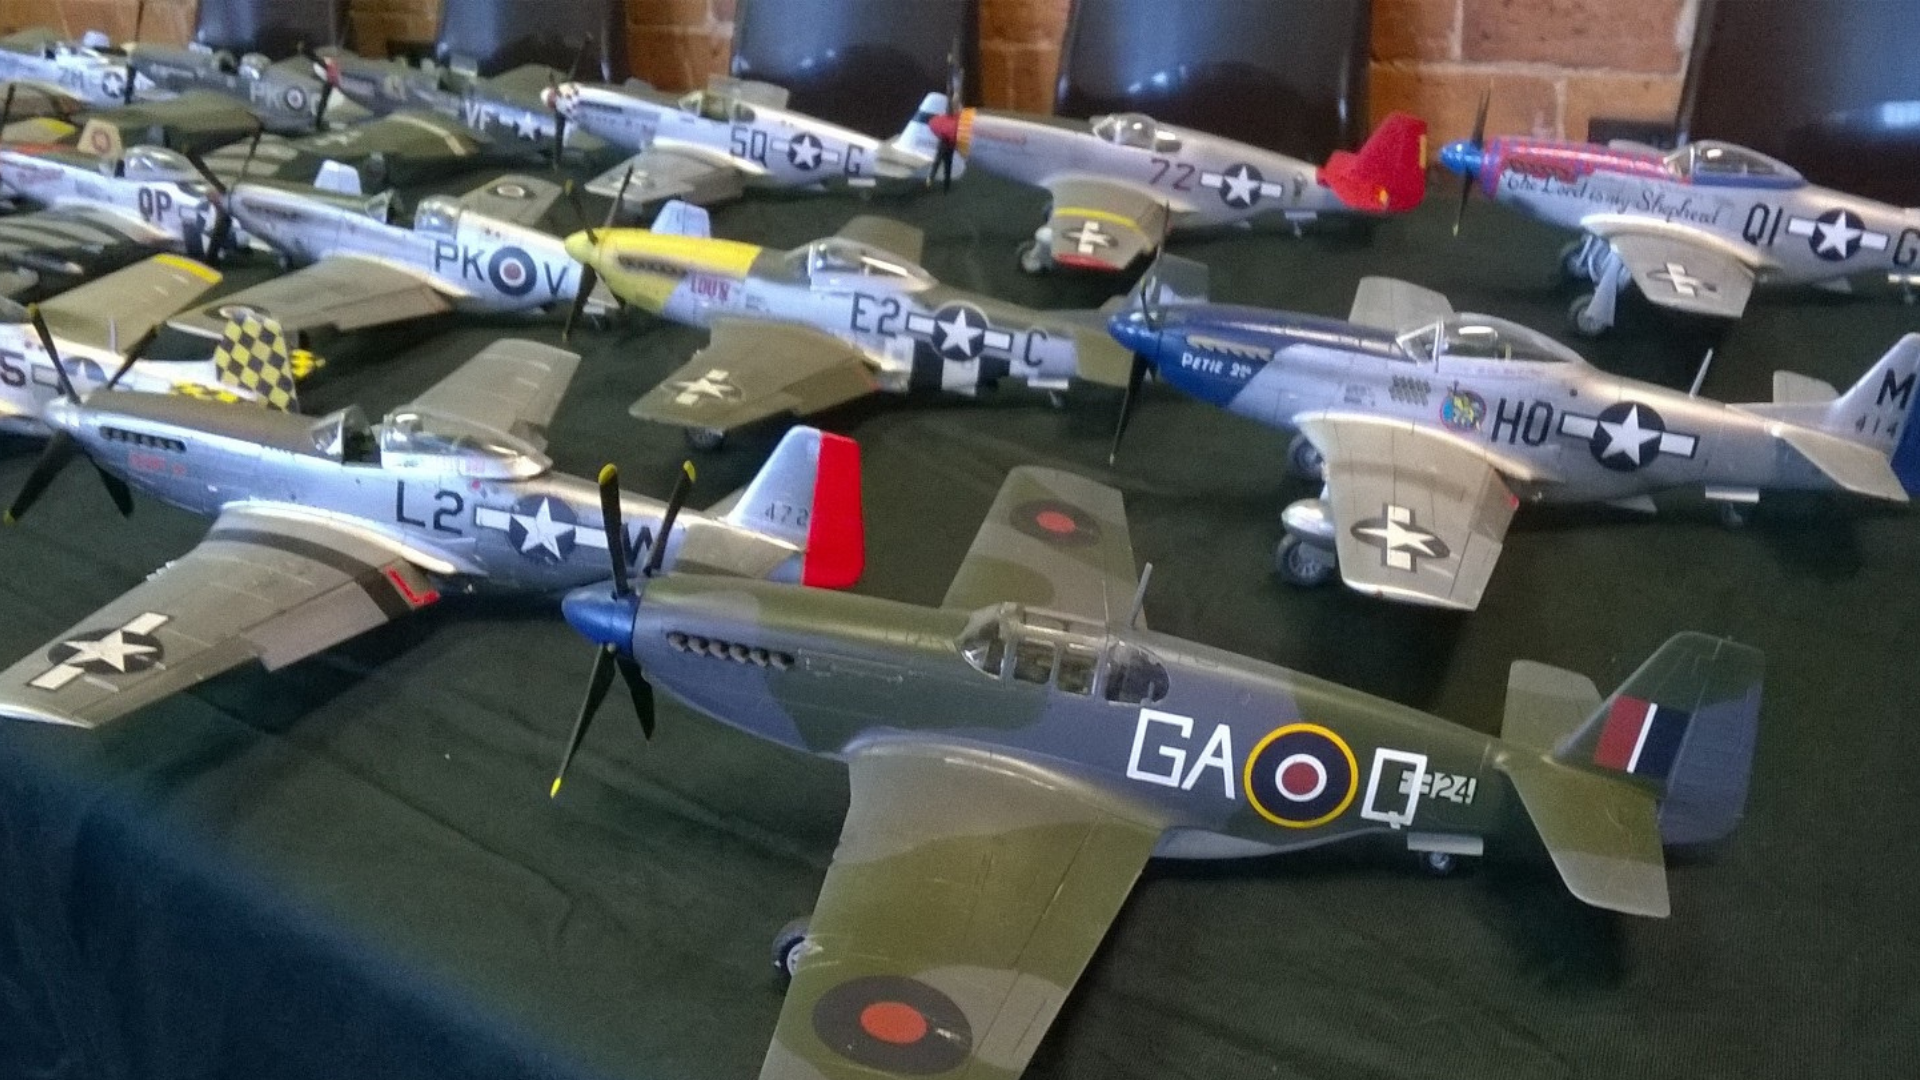 Airfix plane models on a table